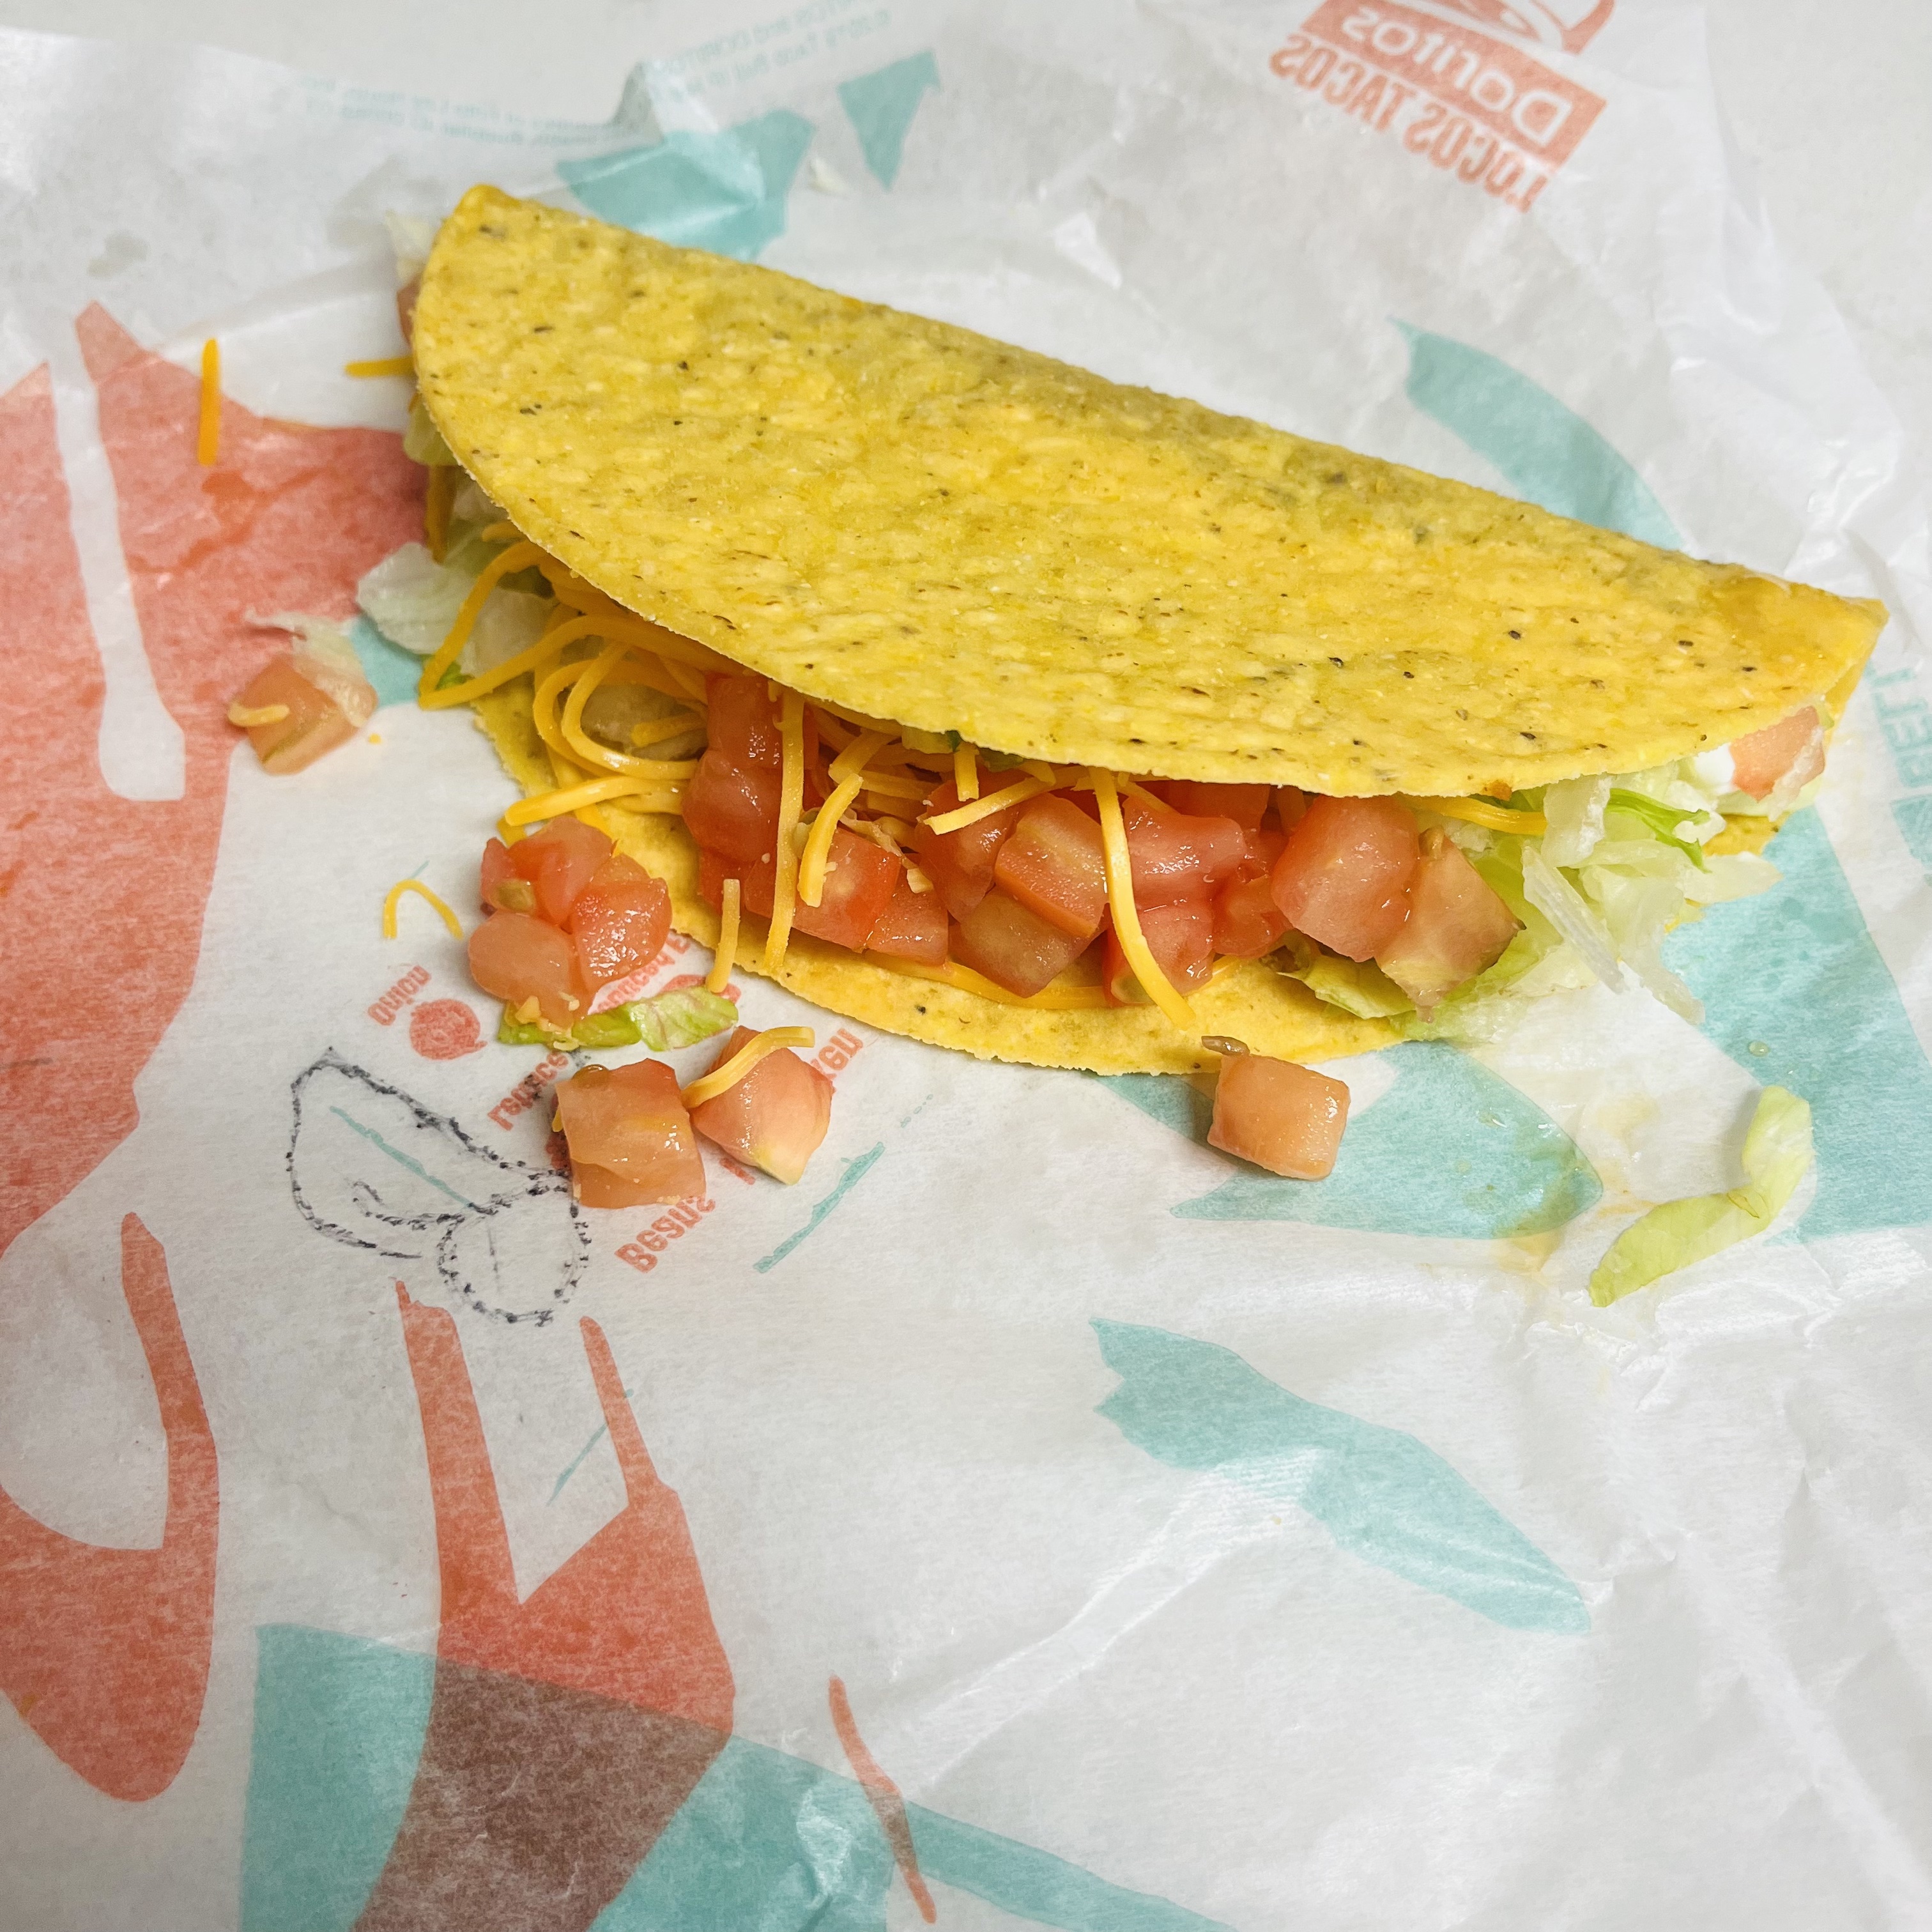 taco Bell ranked